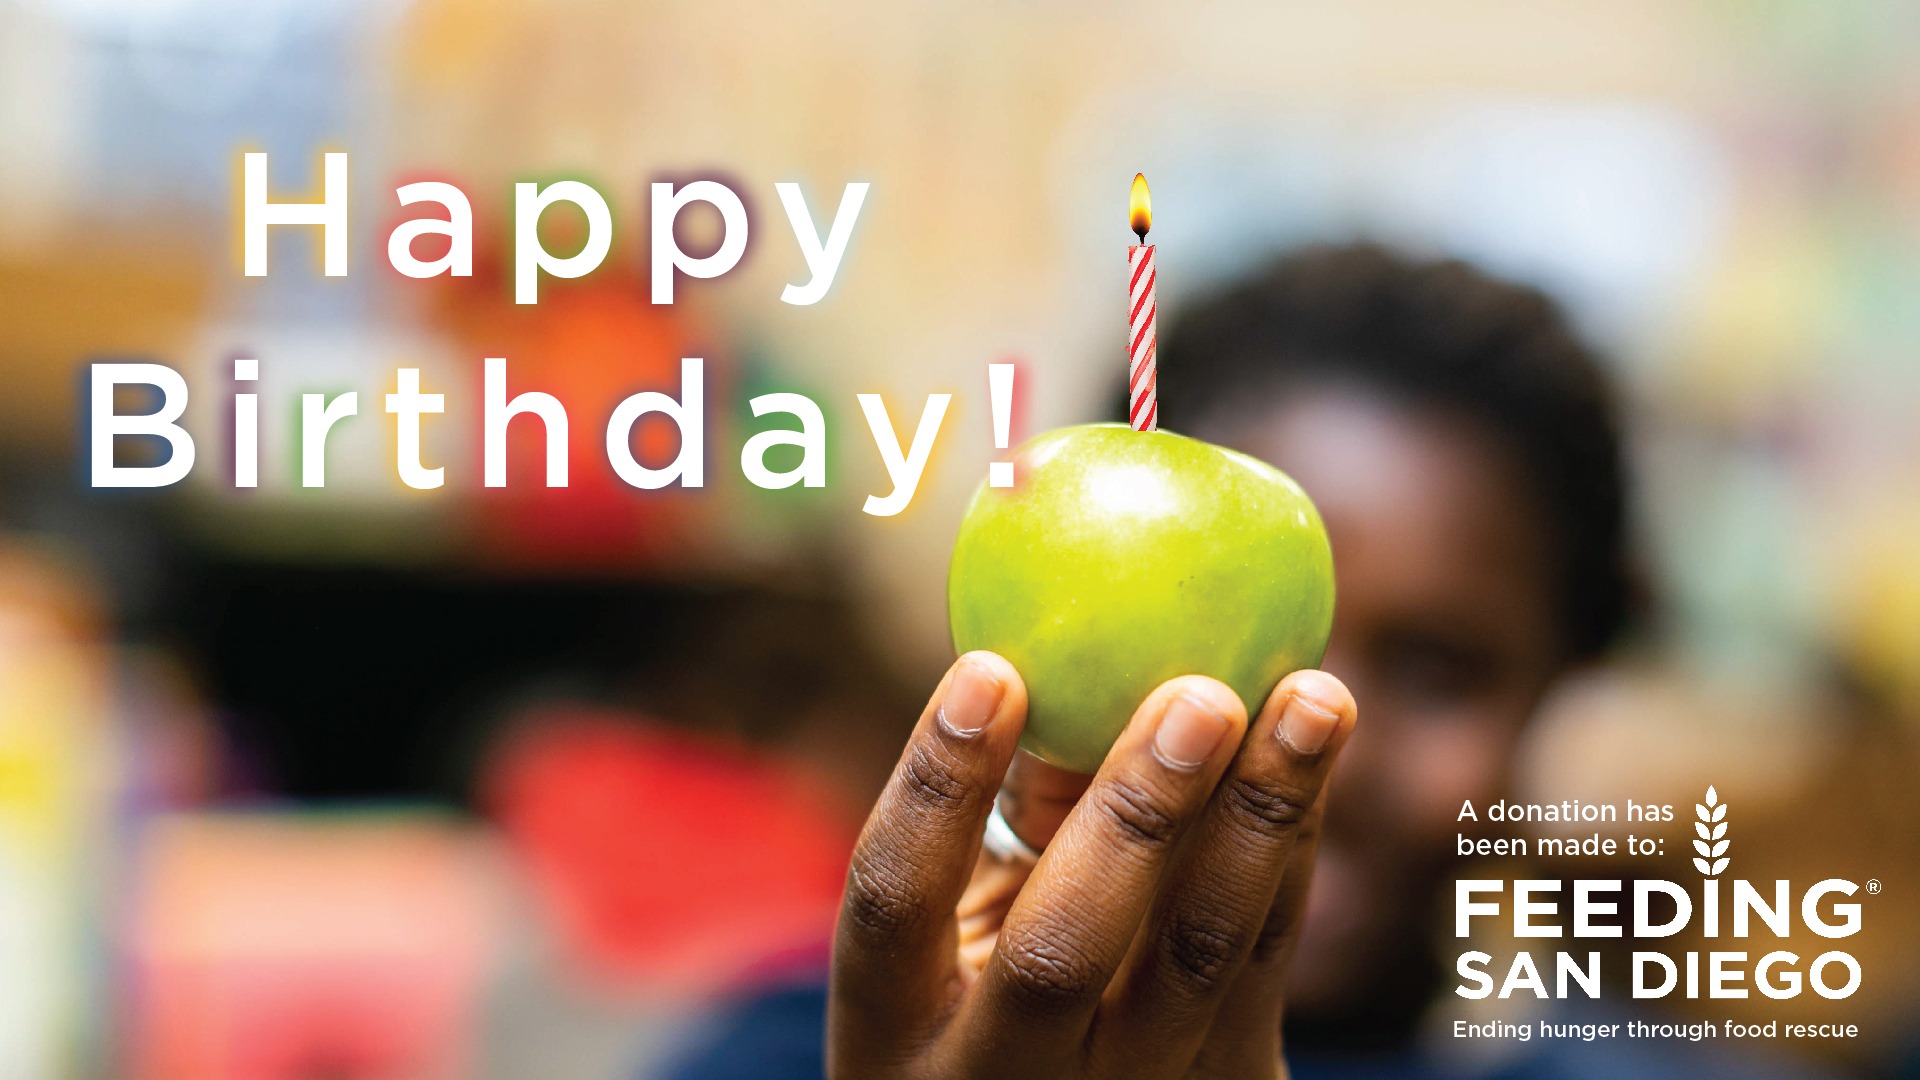 An e-card with a photo of a hand holding an apple with a birthday candle in it and text that reads Happy Birthday! A donation has been made to Feeding San Diego